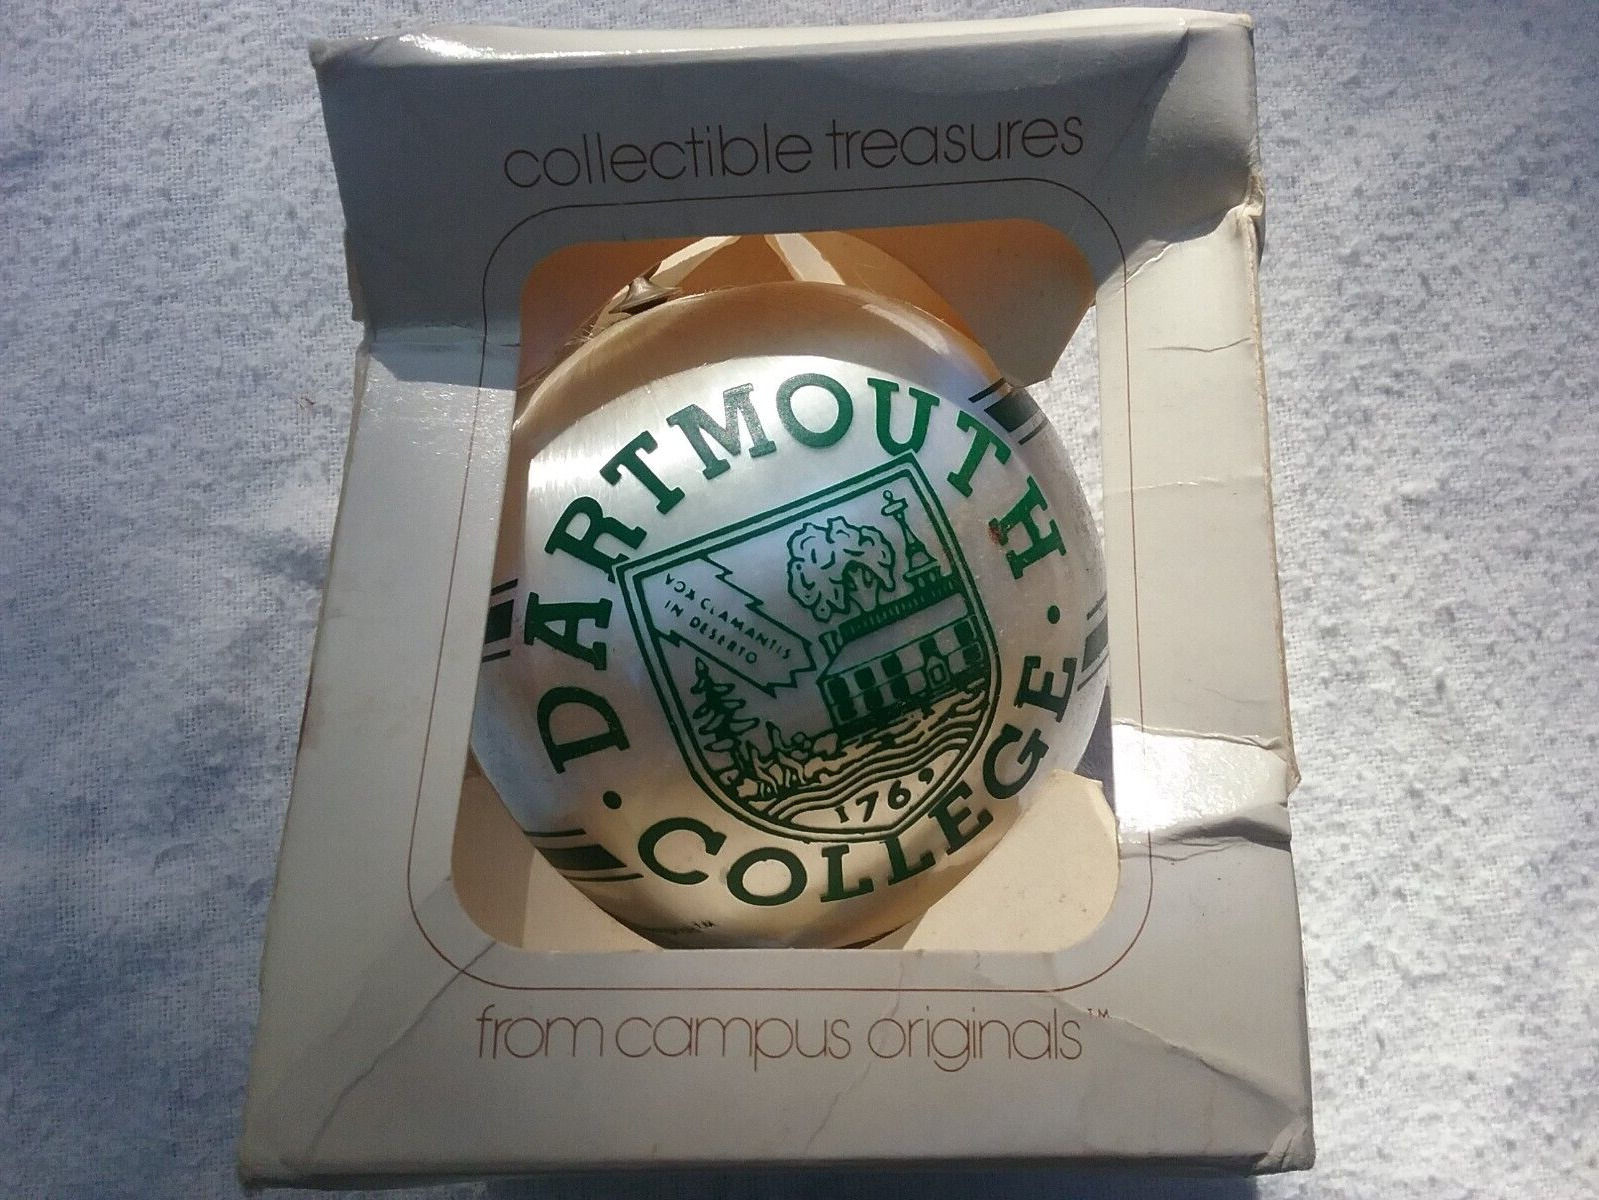 Vintage Dartmouth College Christmas Tree Ornament in Original Packaging VGC